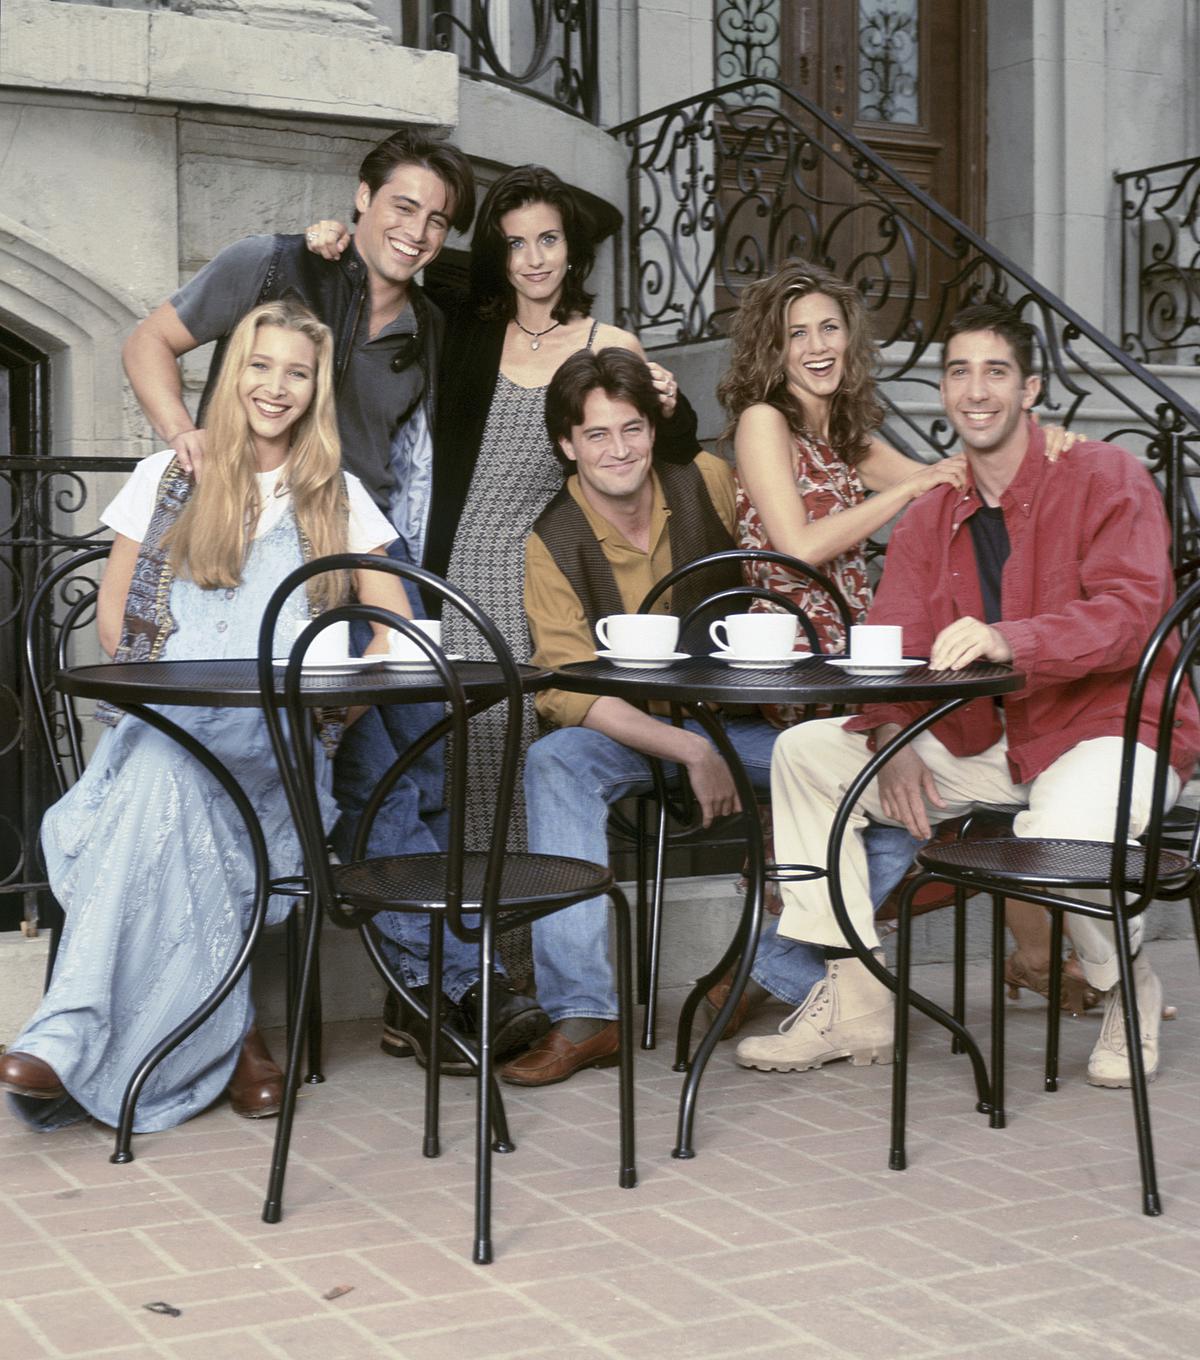 The main cast of 'Friends'.